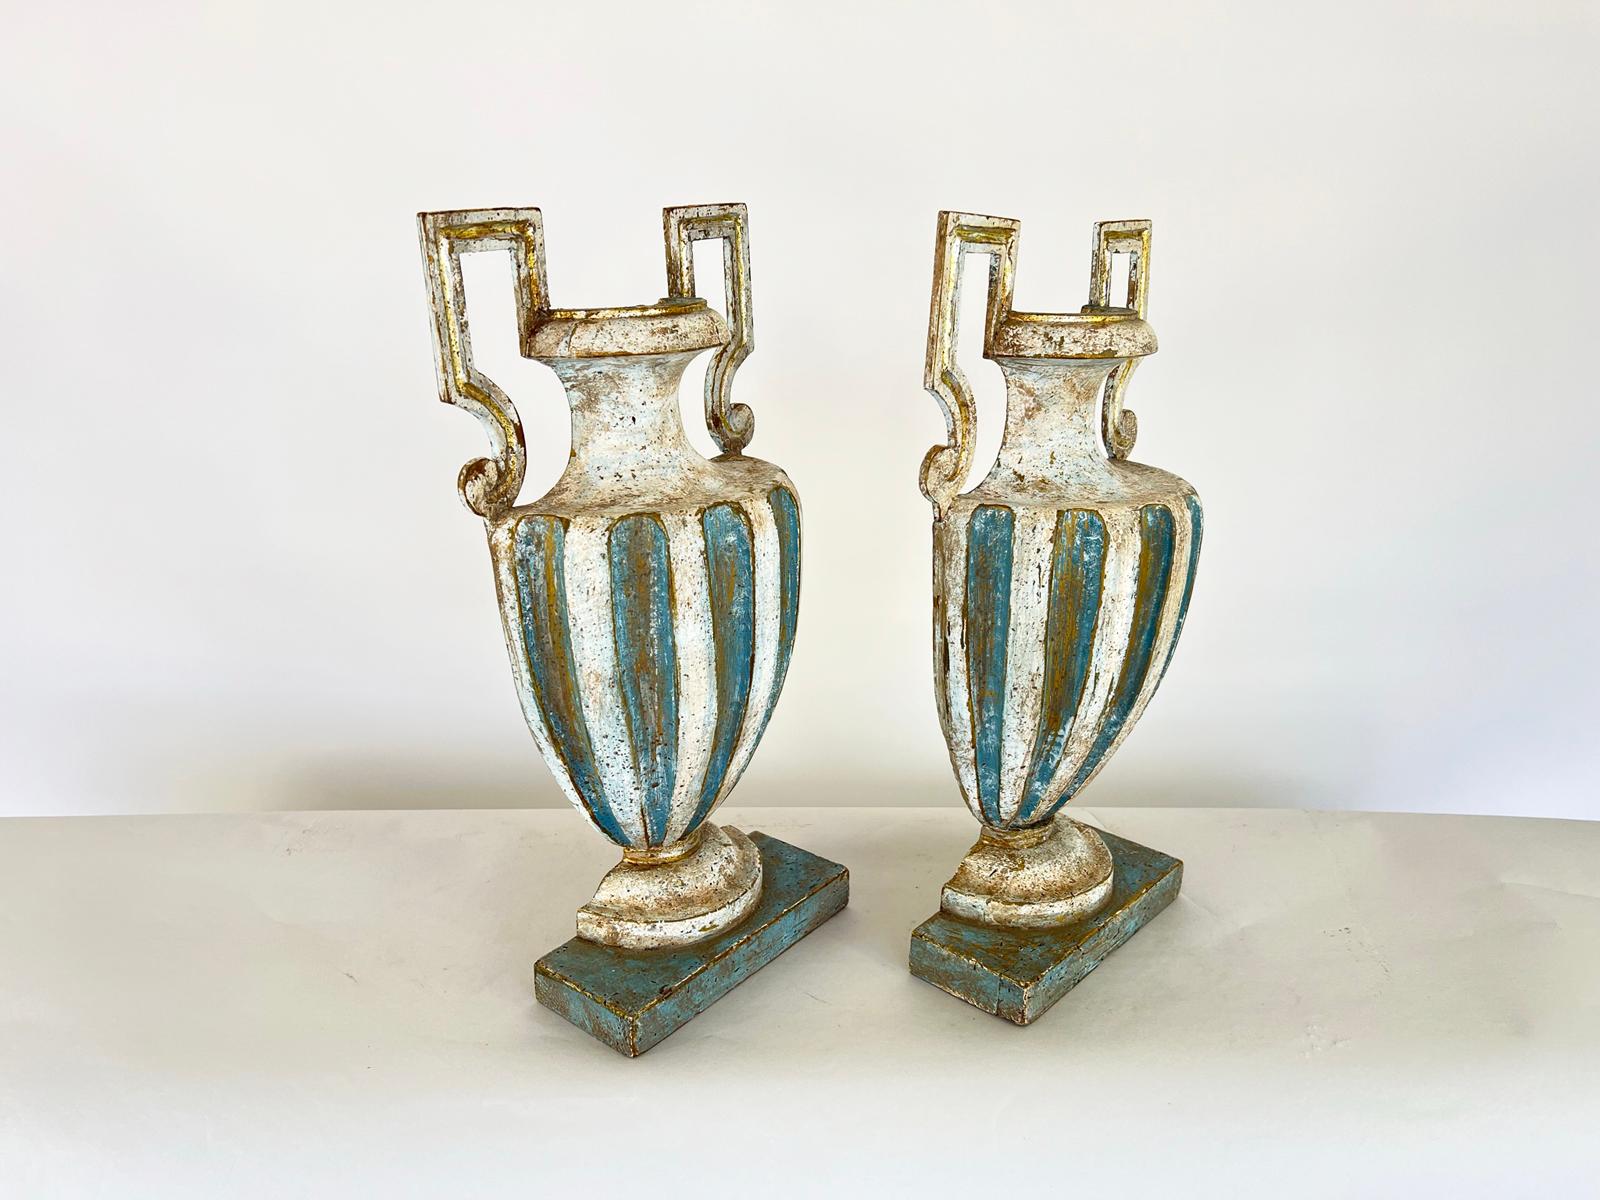 Pair of divided urns, once whole, Neoclassical period, of carved wood with distressed, painted finish;  each having fluted body and square handles, on round foot and rectangular plinth.